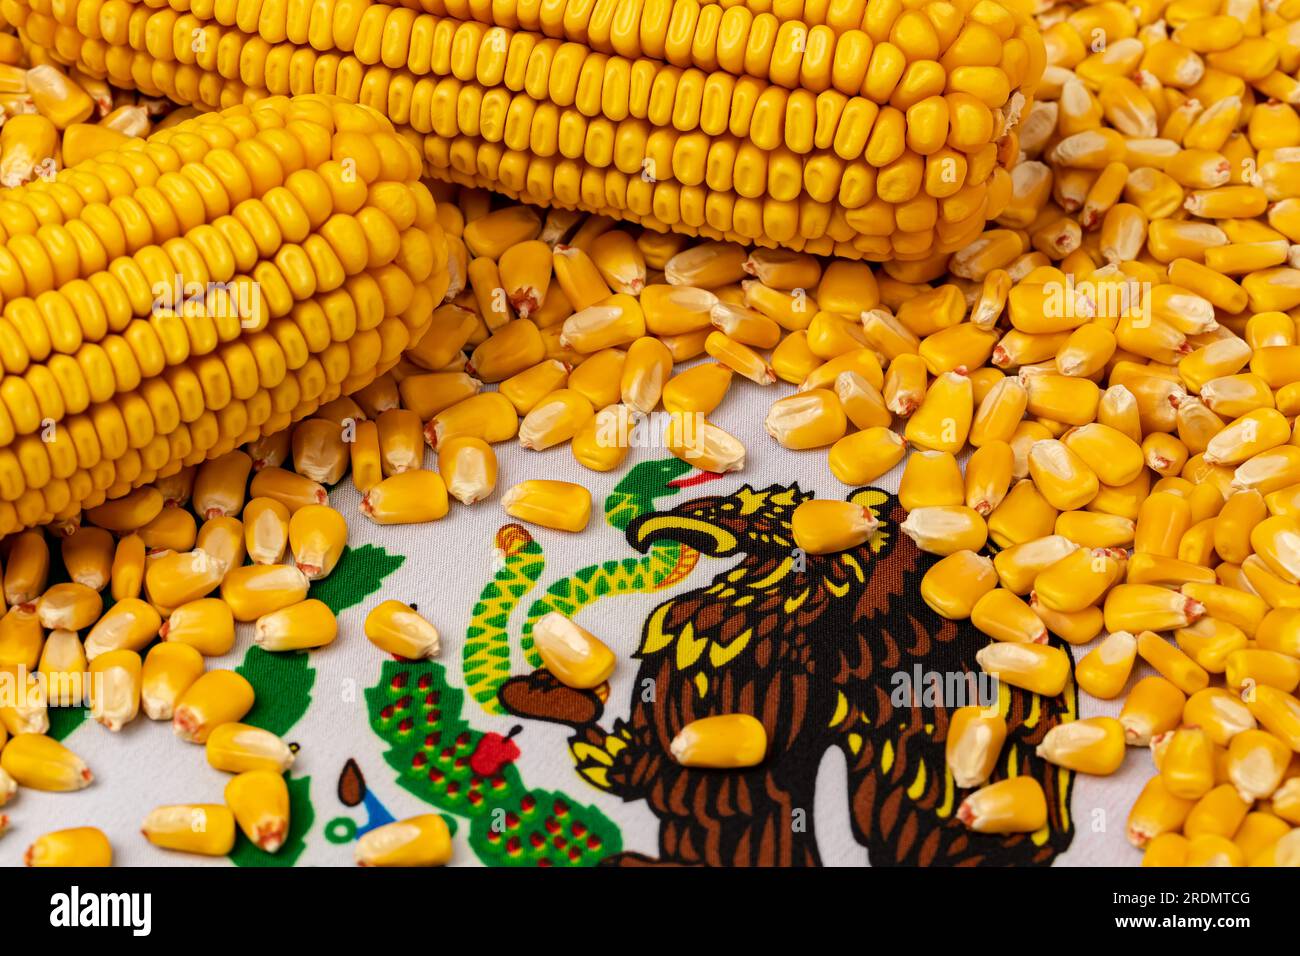 Mexico flag and corn kernels. Agriculture trade GMO ban, imports and exports concept. Stock Photo